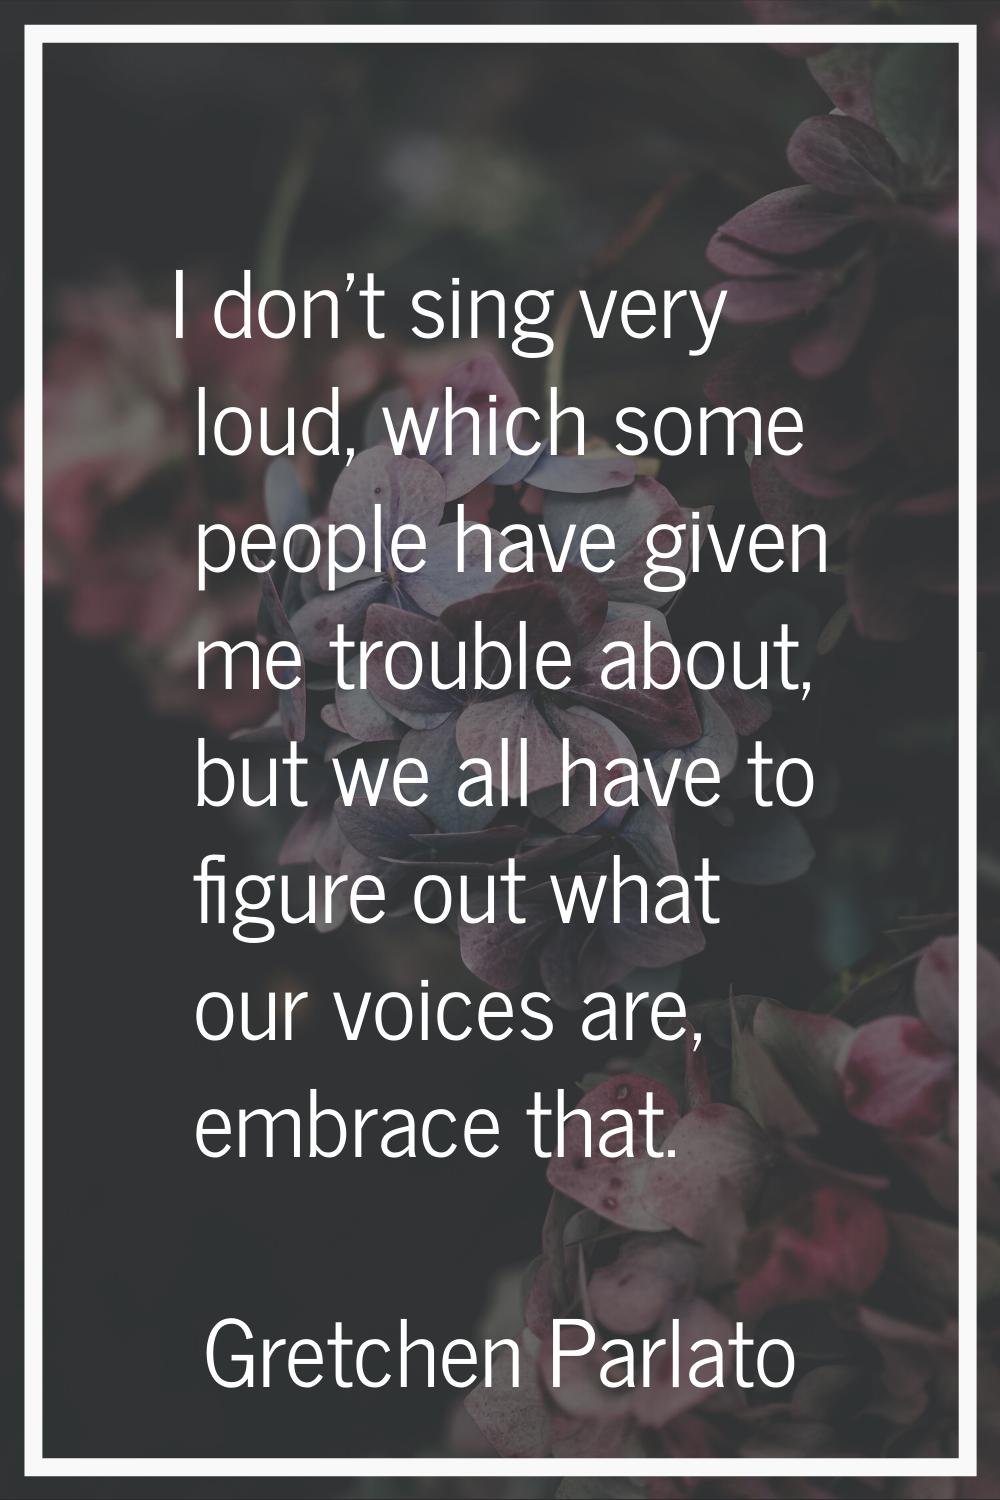 I don't sing very loud, which some people have given me trouble about, but we all have to figure ou